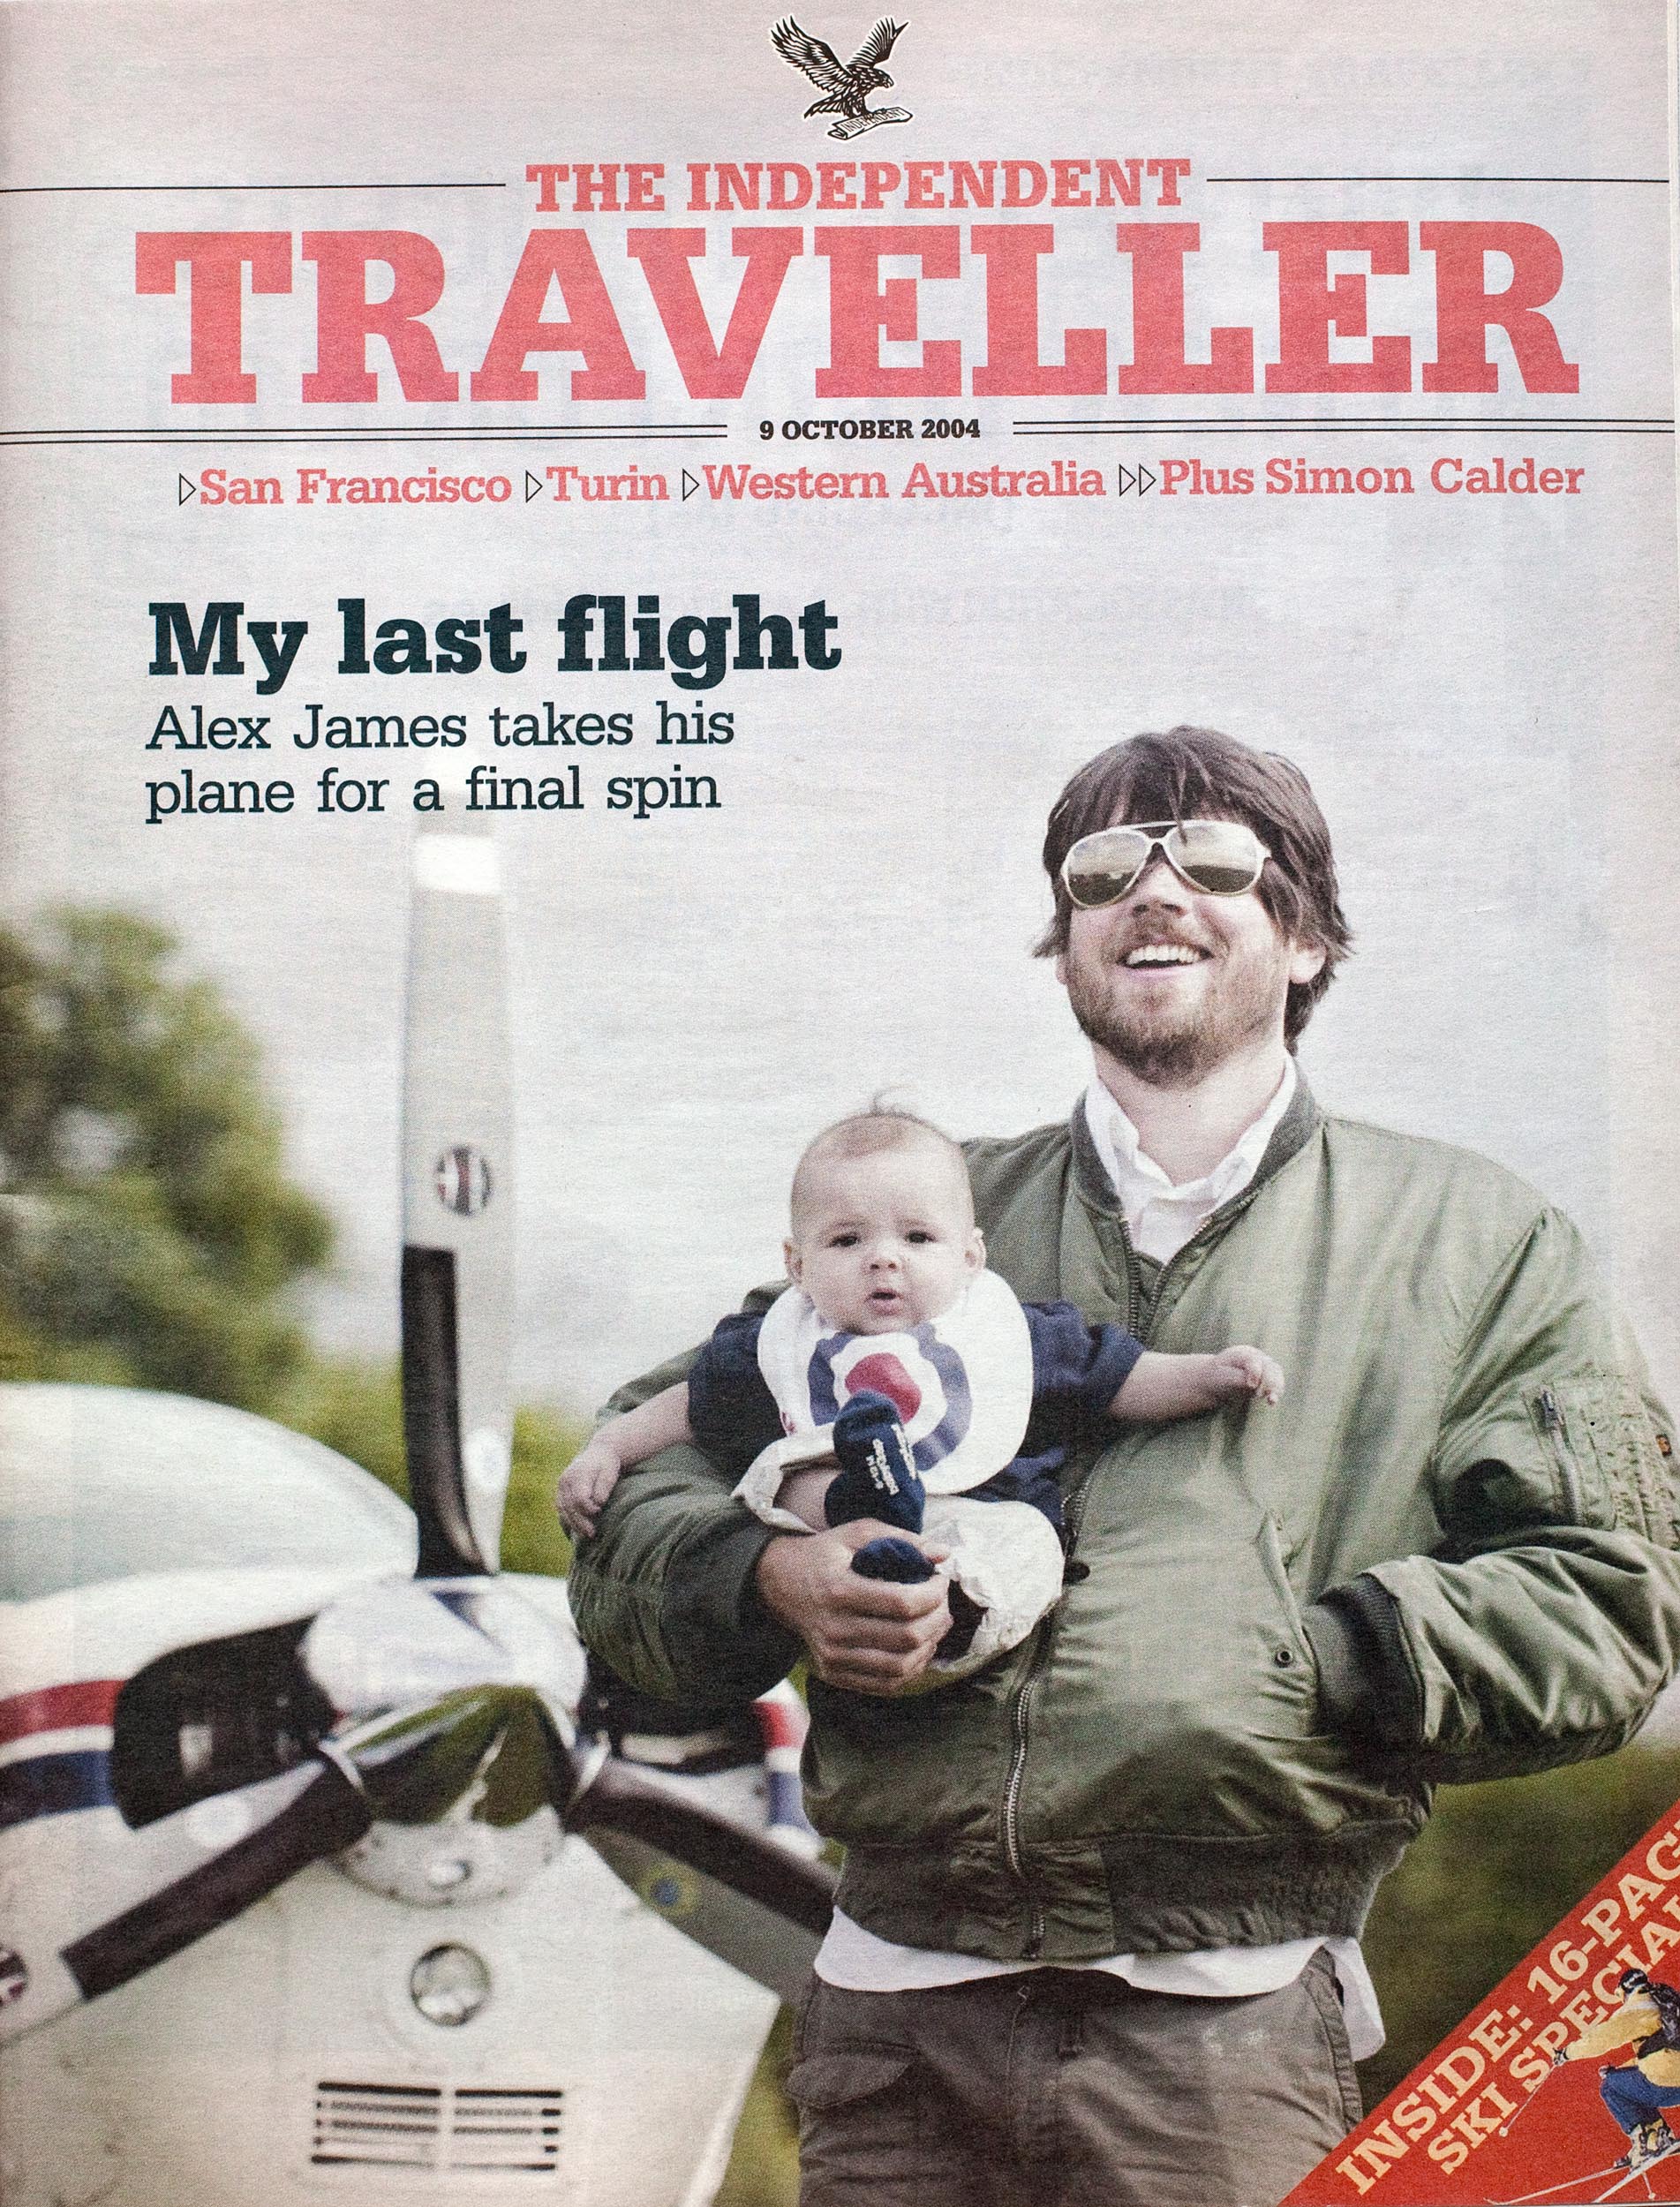 The Independent Traveller